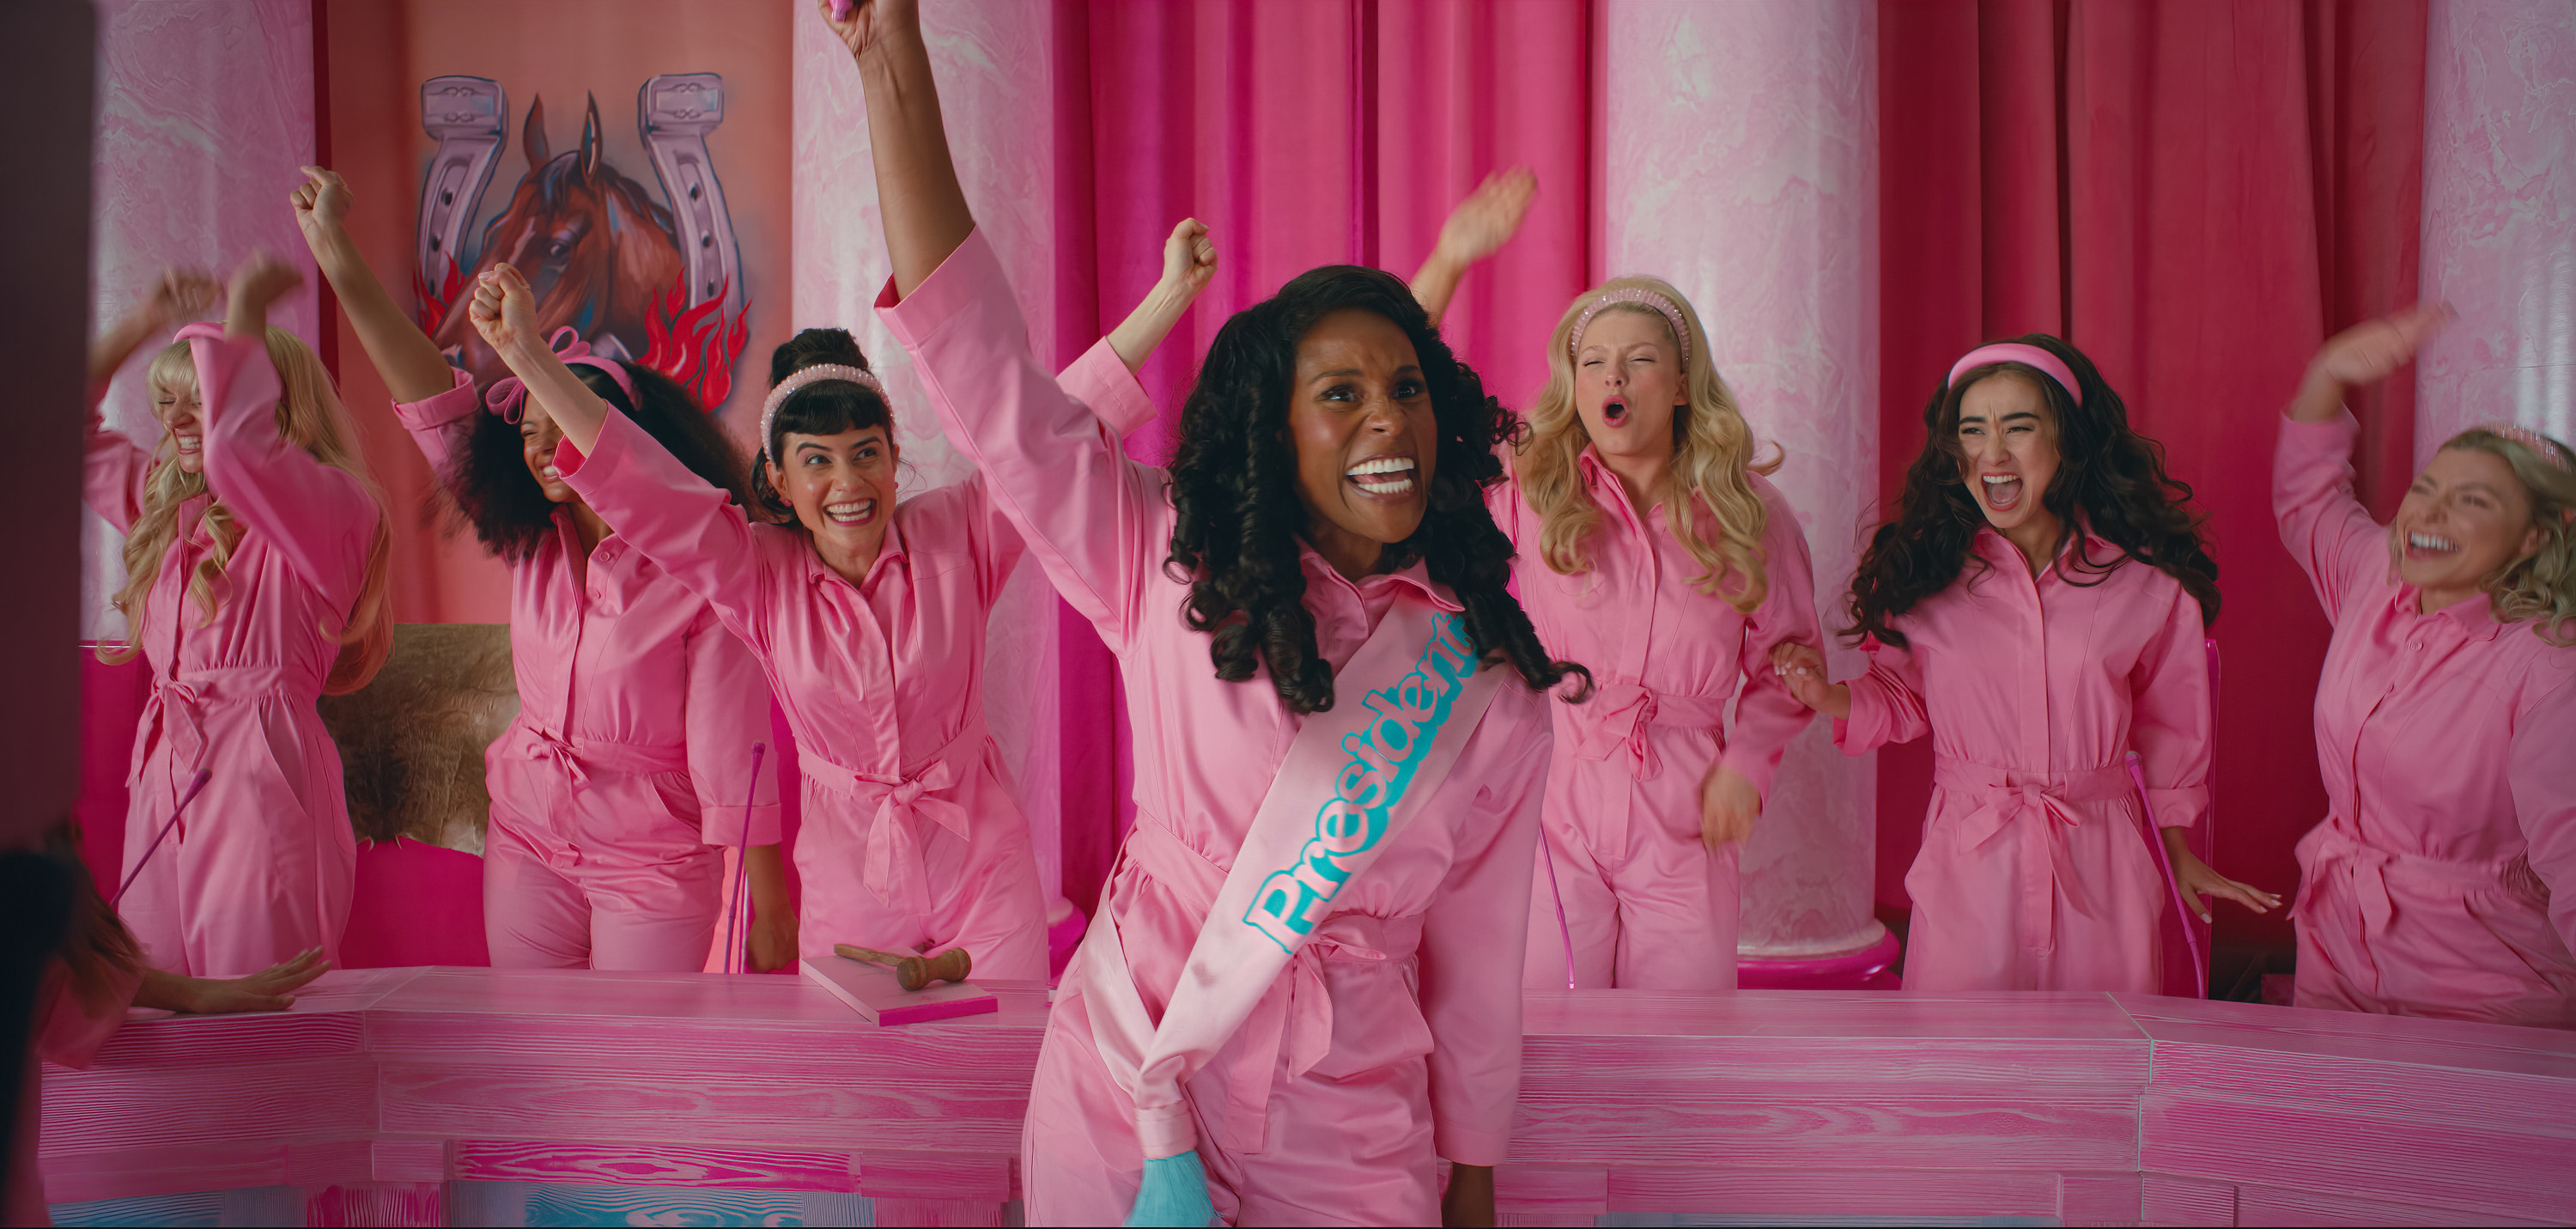 Issa Rae as Barbie raising her arm and cheering as others do the same behind her